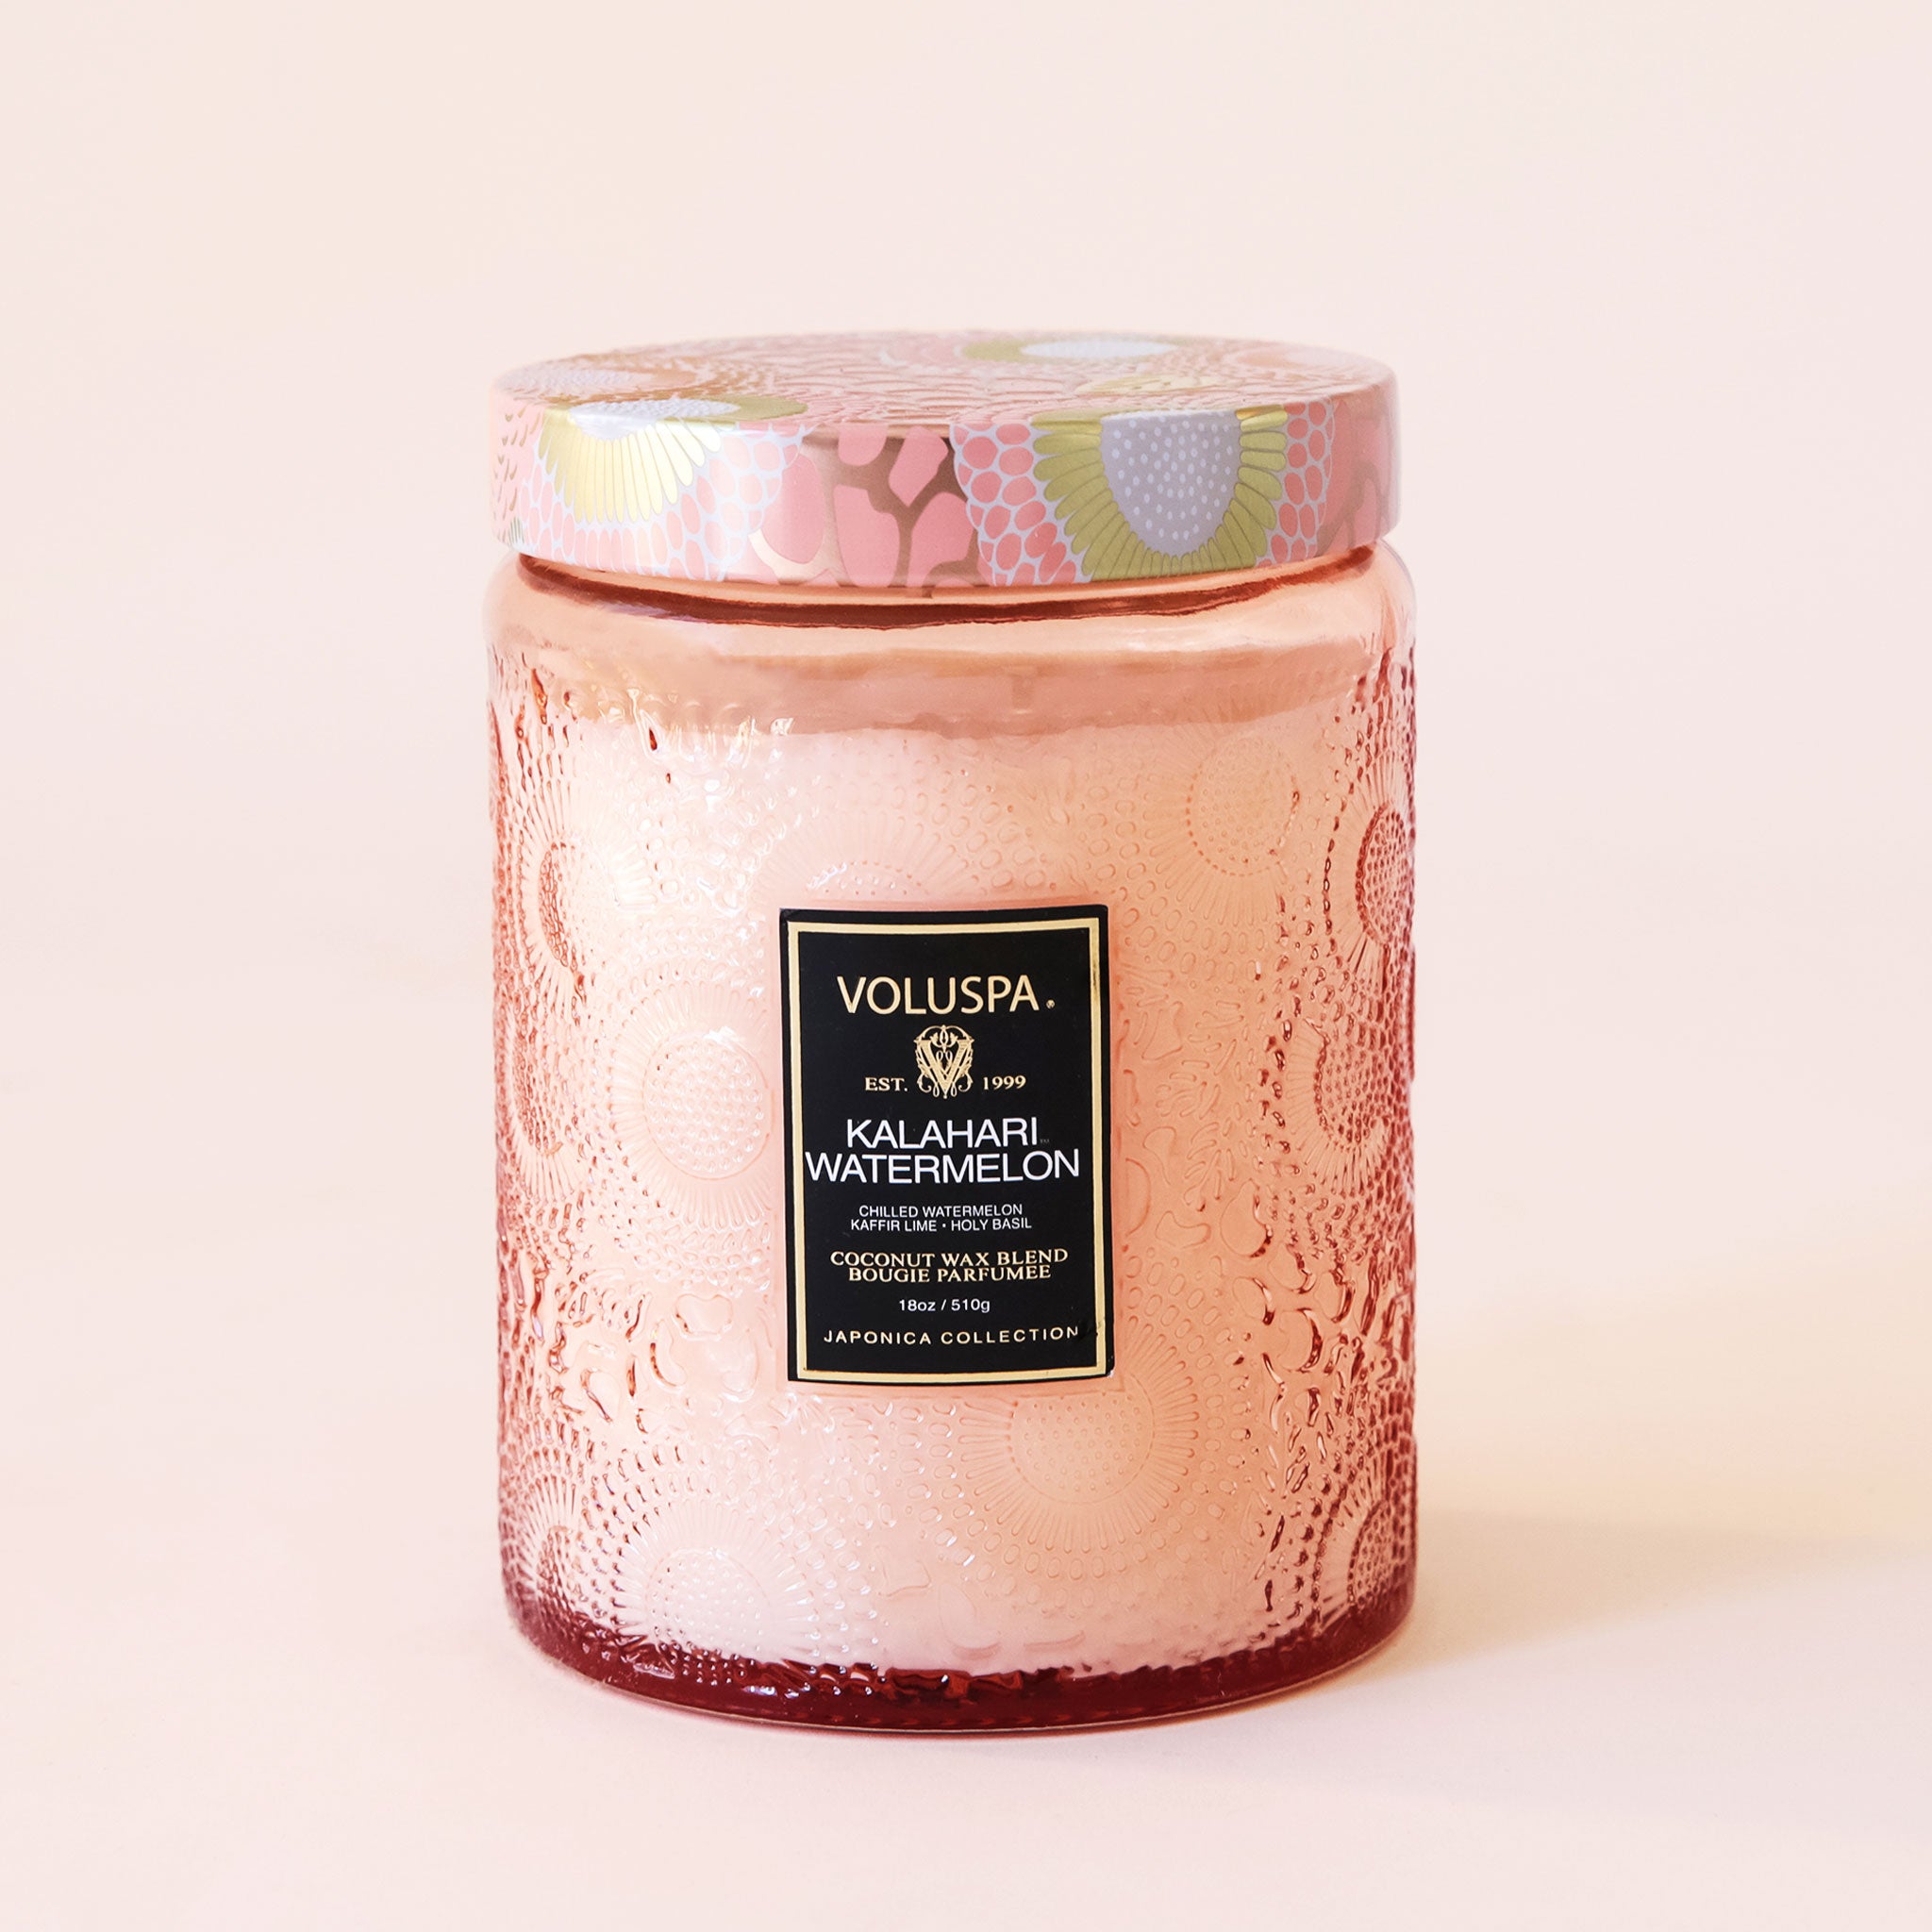 Pink colored embossed candle with patterned colorful lid. The embossed pattern and lid have an abstract floral design with use of the colors peach, gold, and white.